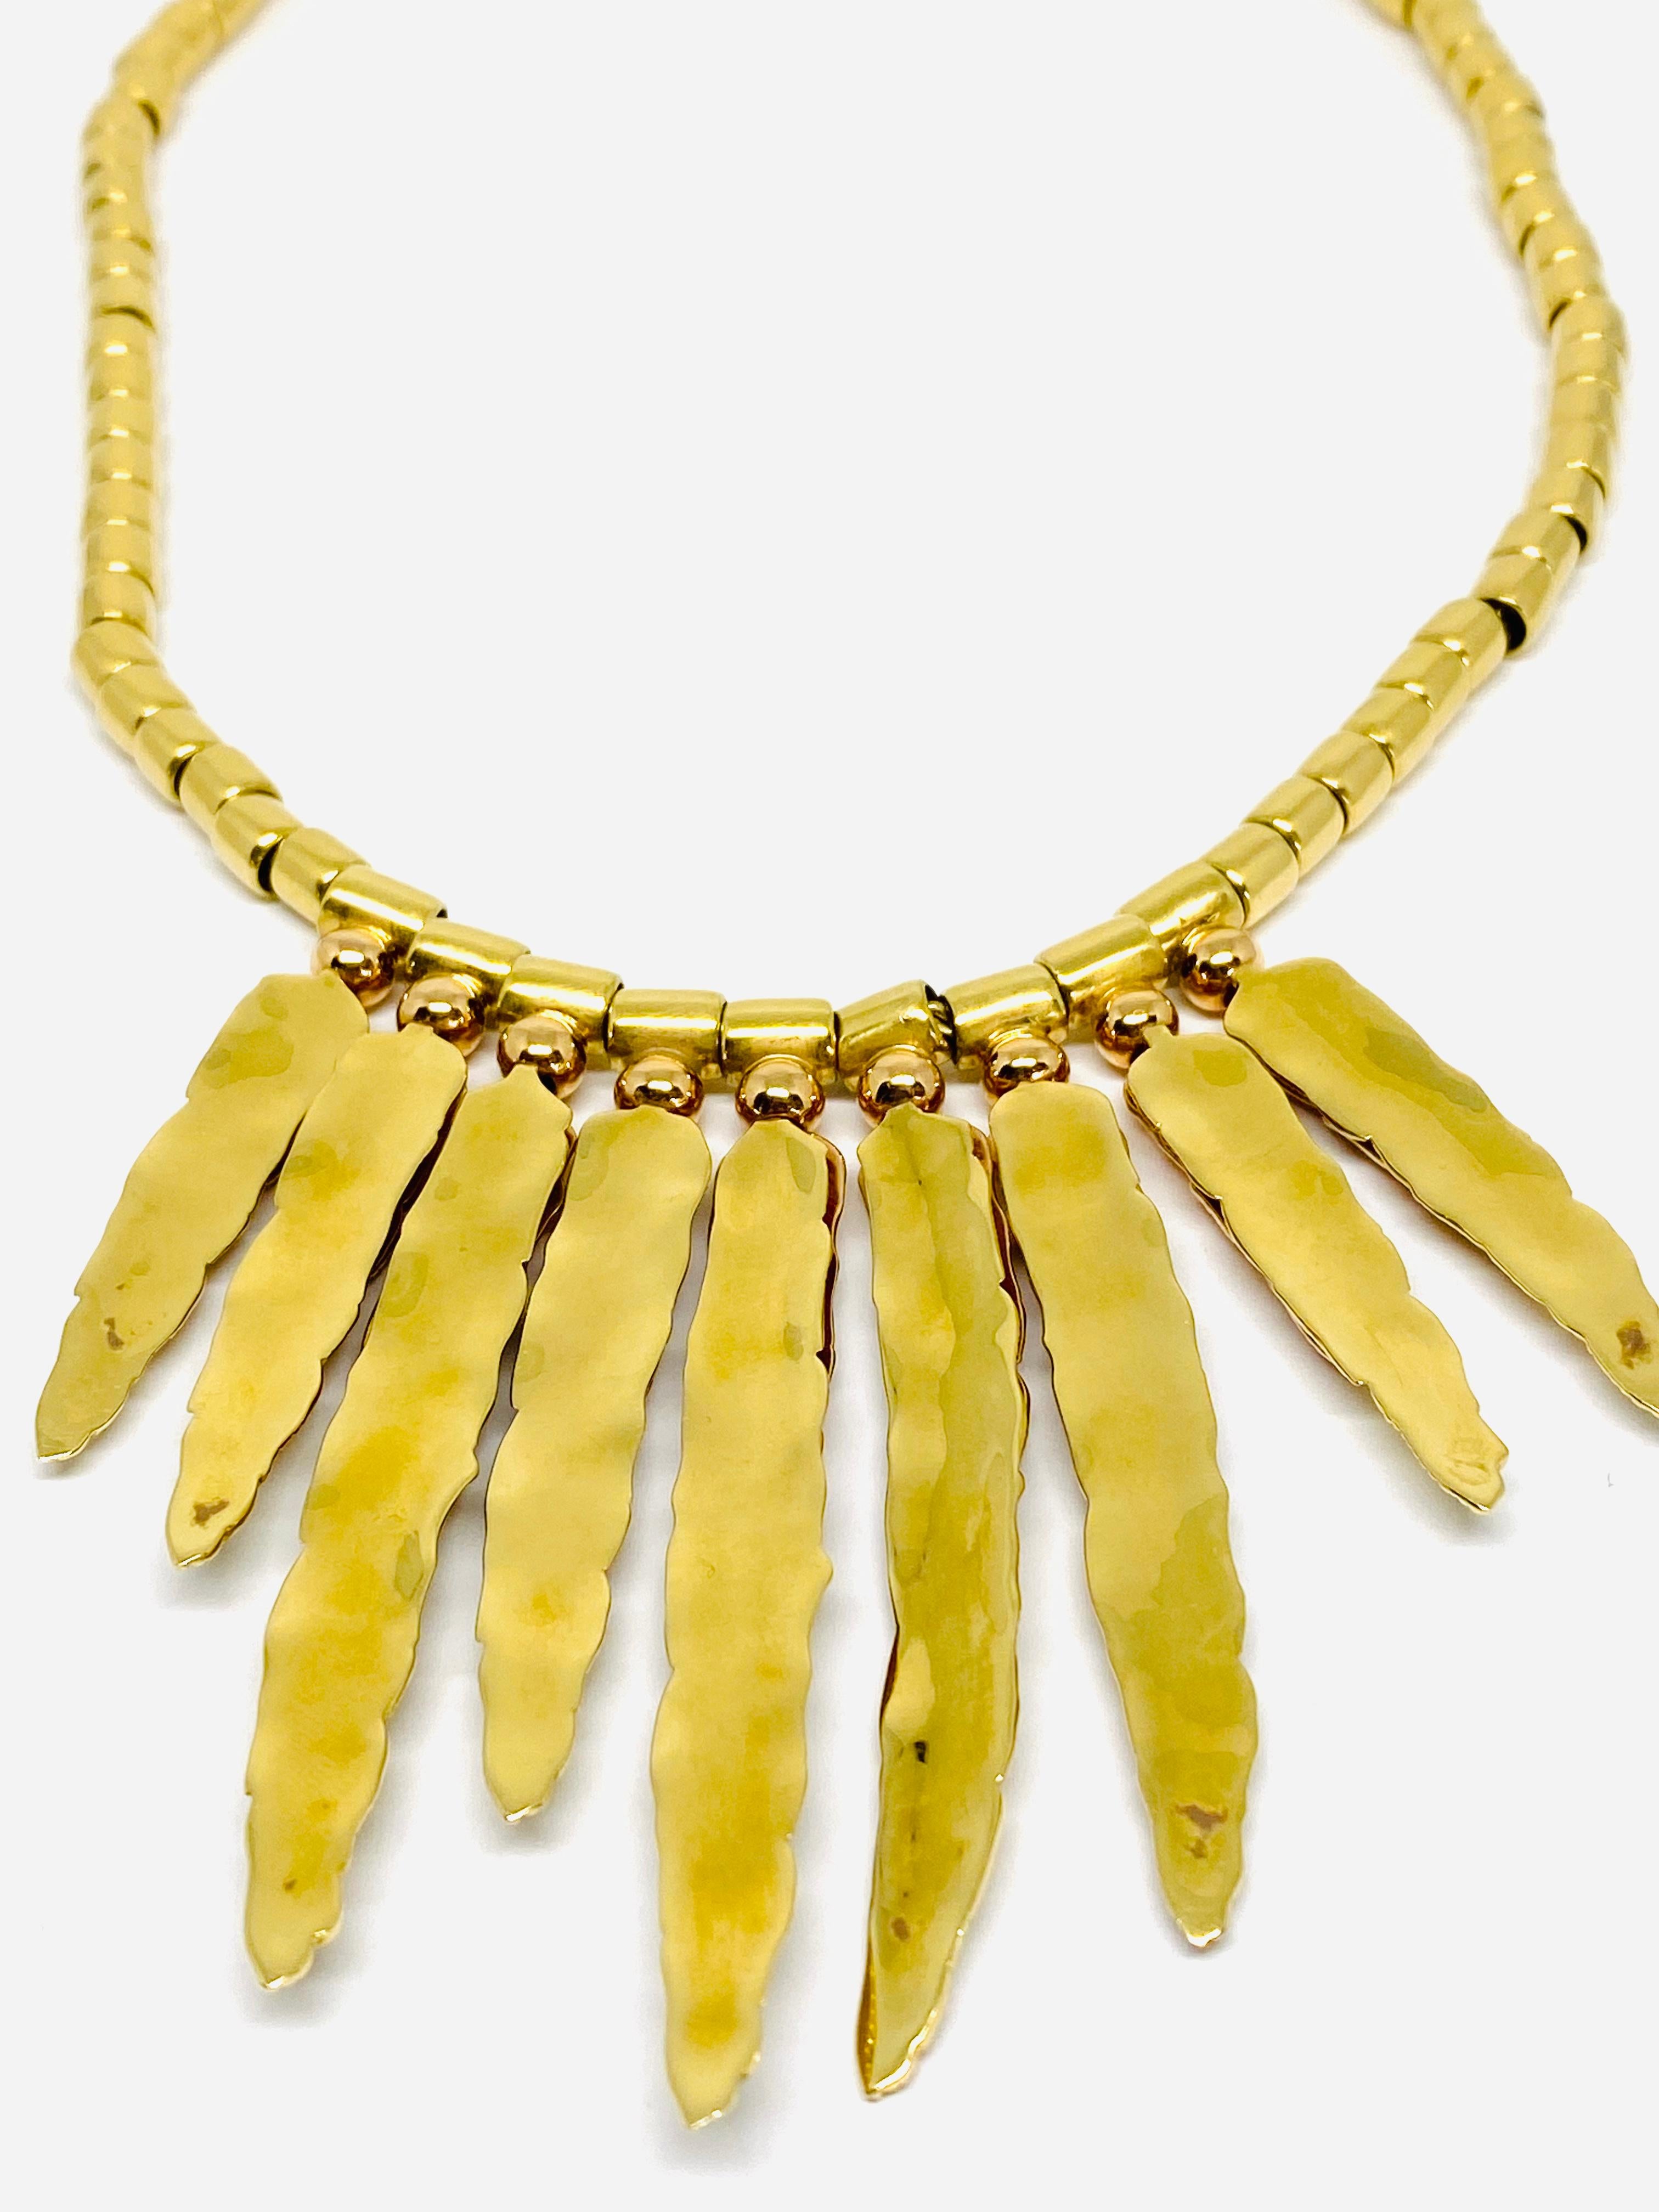 Vintage H. Stern 18K Yellow Gold Bead Necklace w/ Feather Leaves Pendant  4